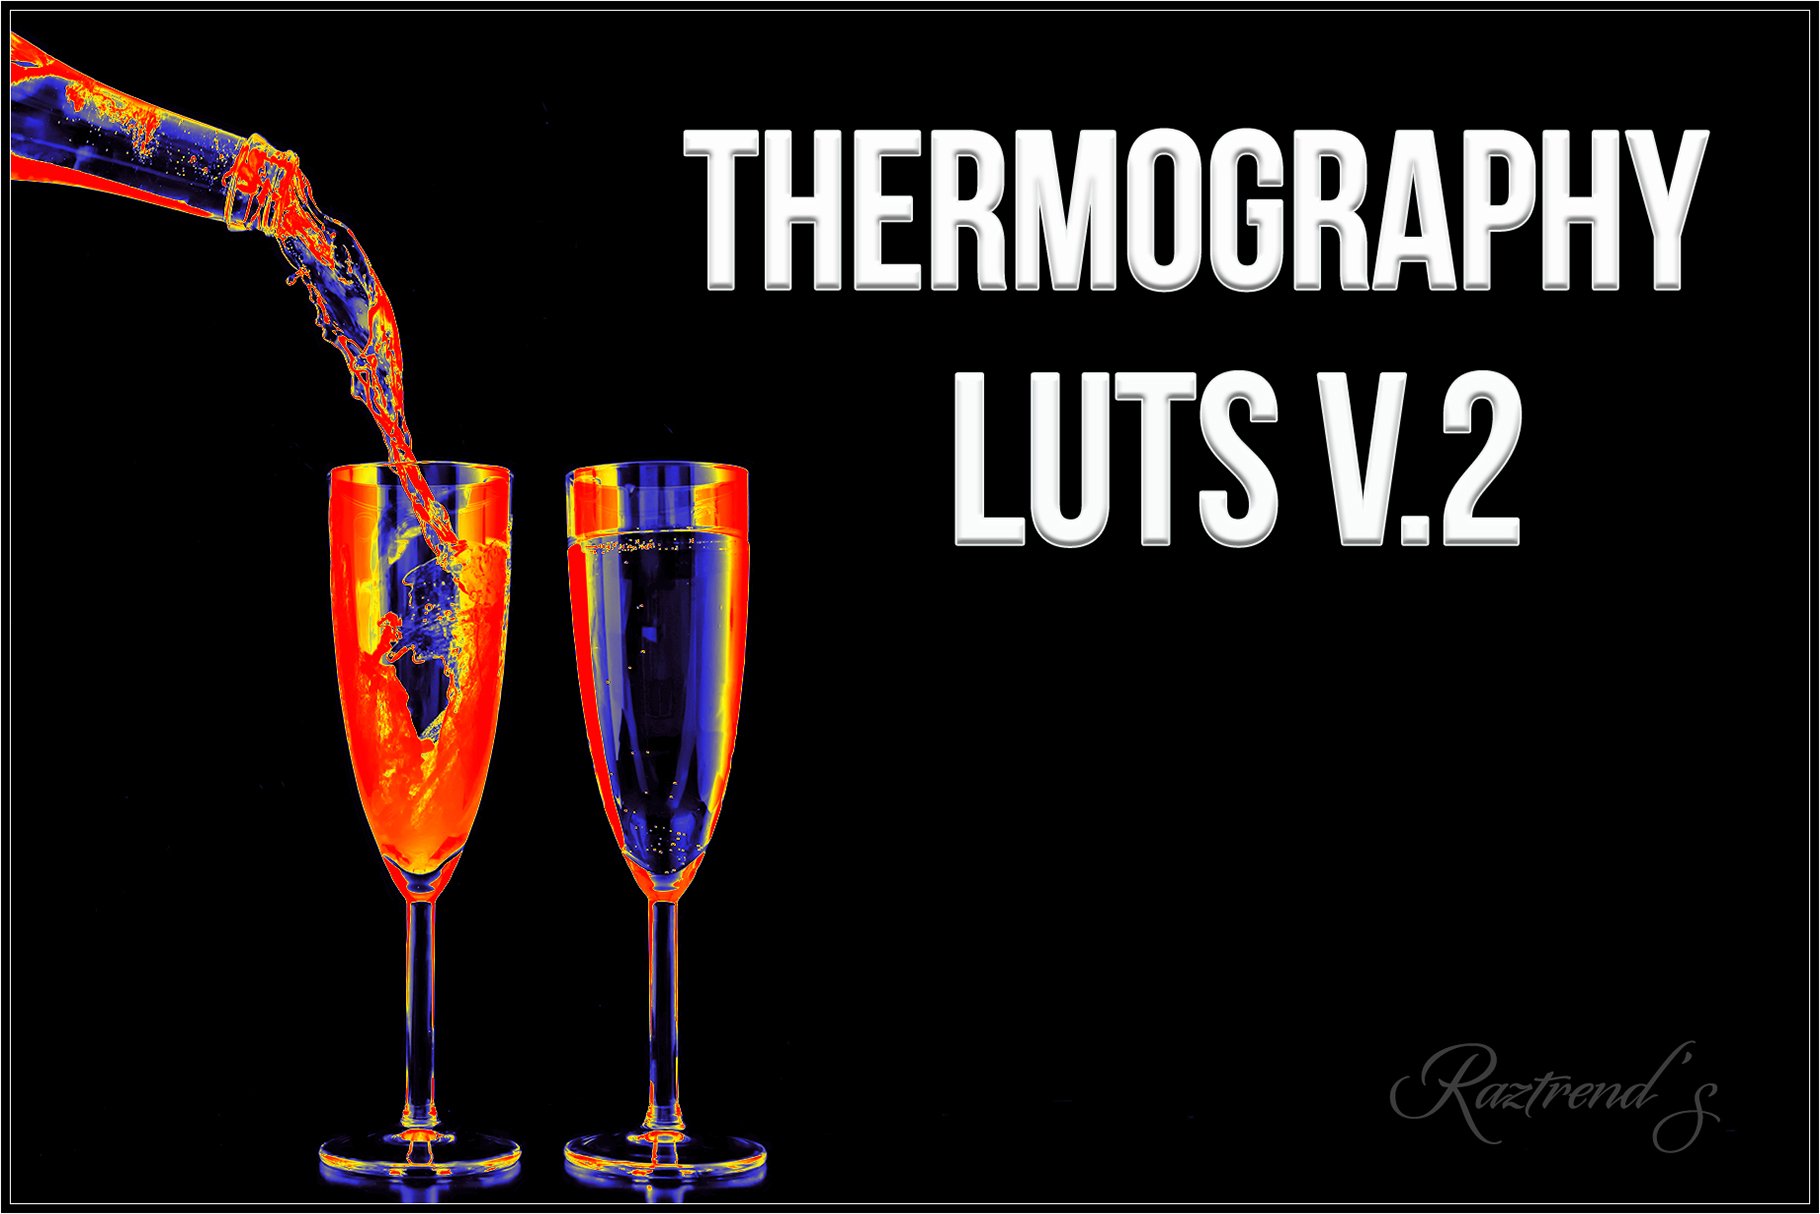 Thermography LUTs - Version 2cover image.